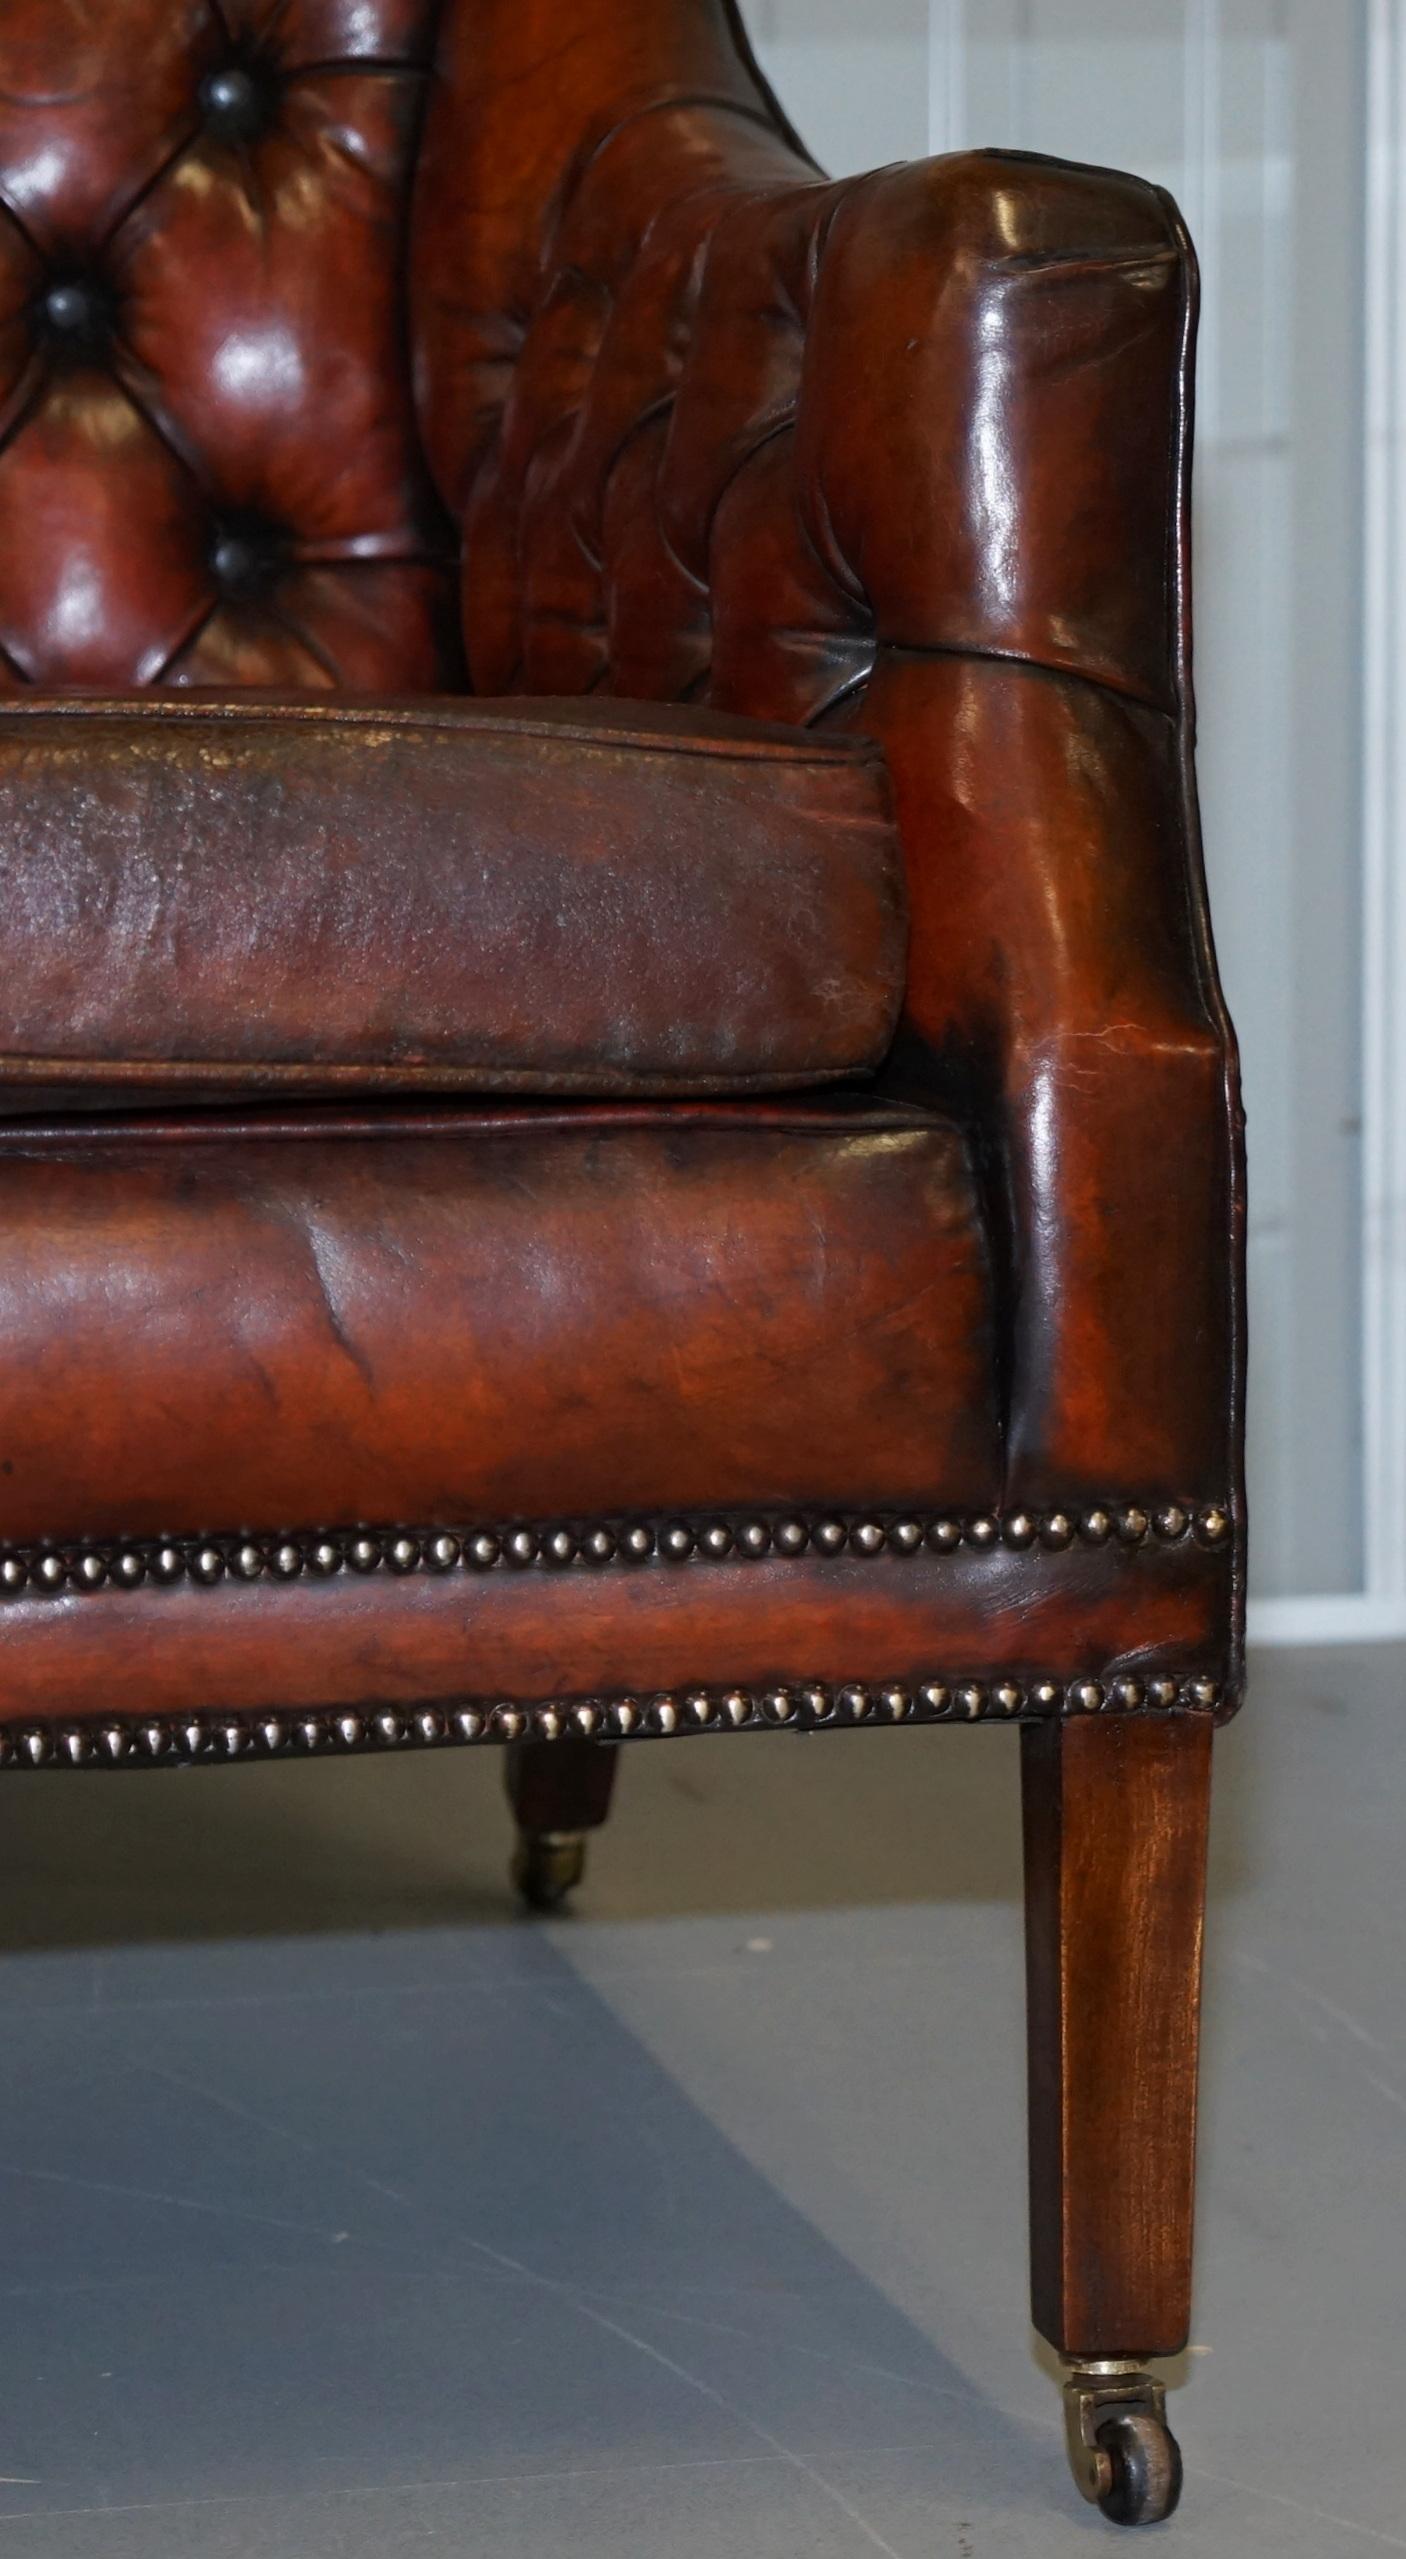 Fully Restored Whisky Brown Leather Lutyen's Viceroy Sofa, circa 1900  For Sale 3